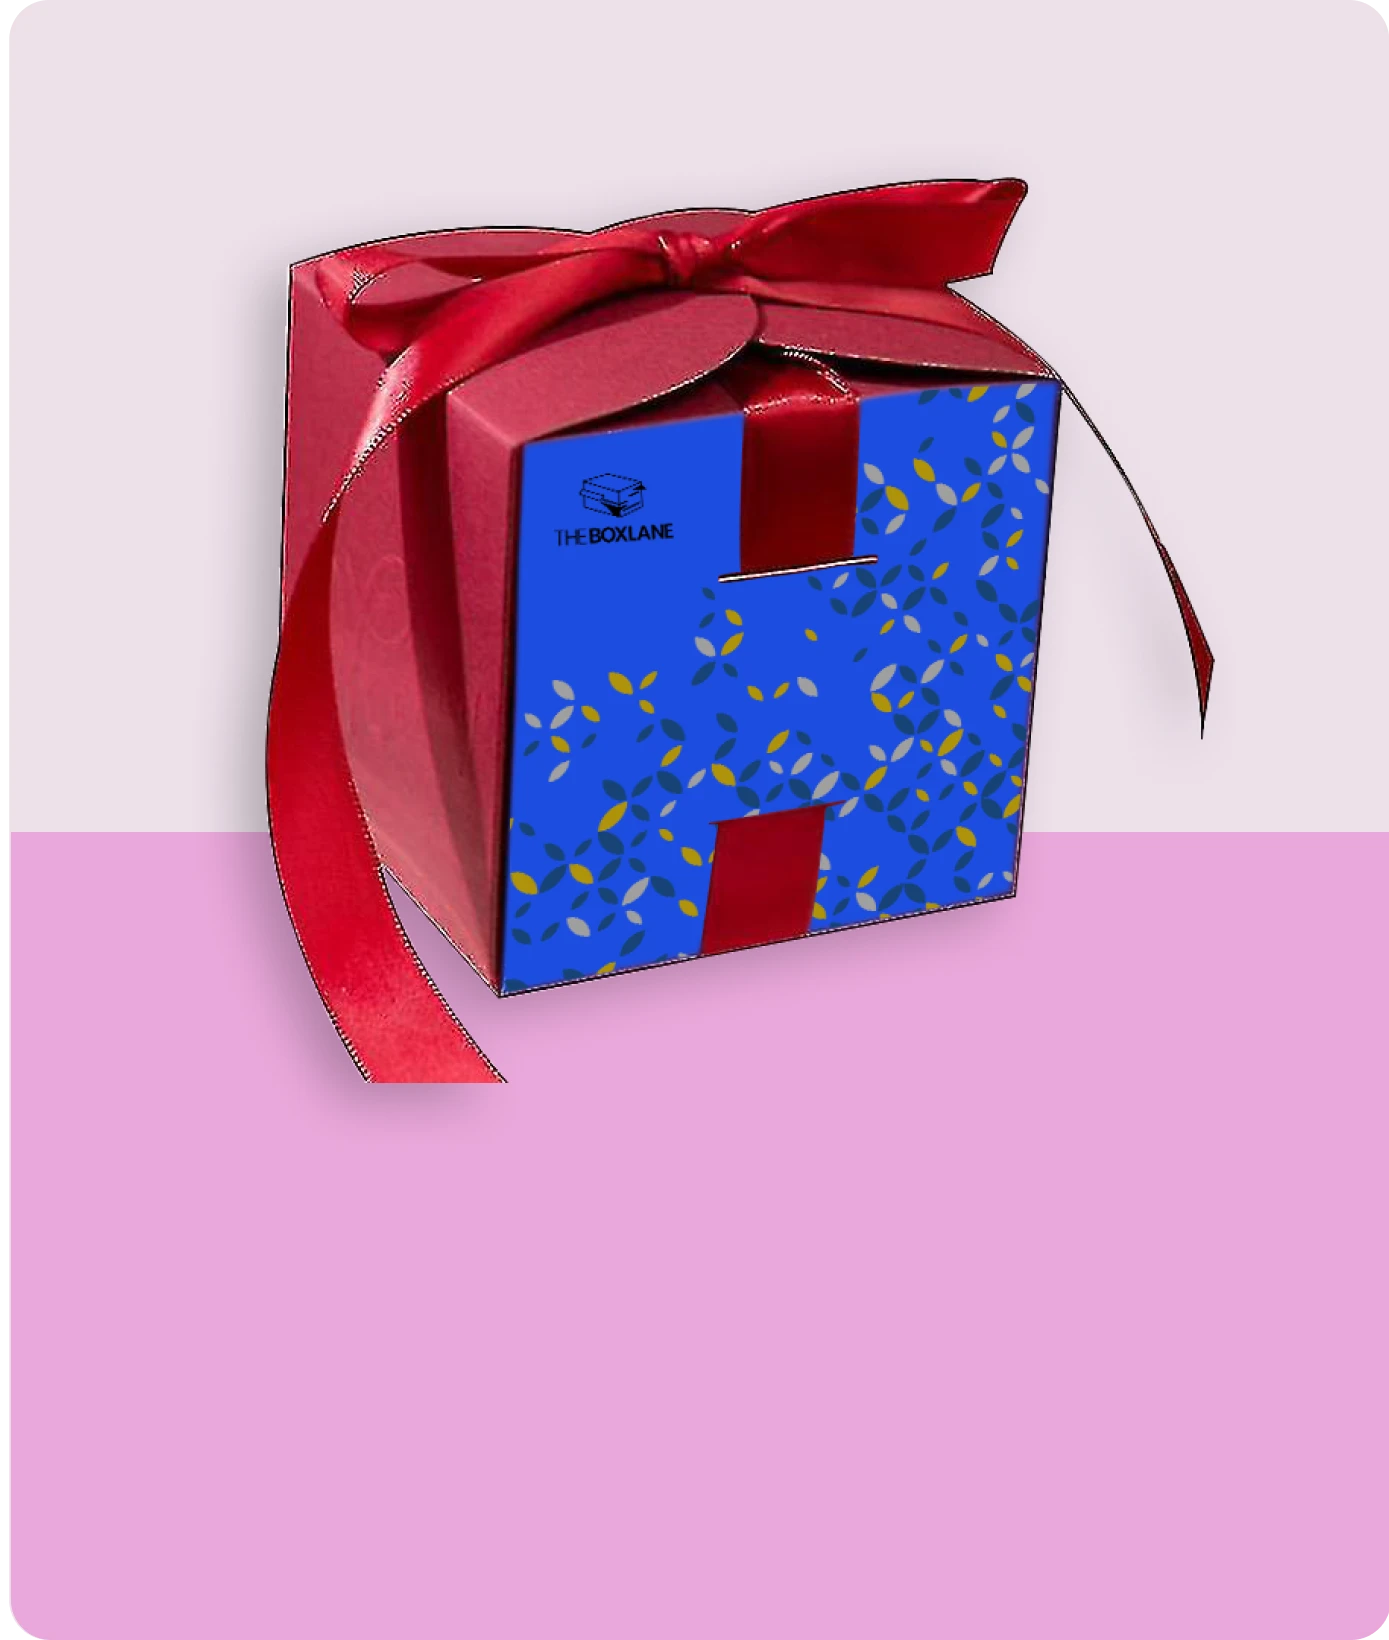 Christmas Present Boxes related product image | The Box Lane